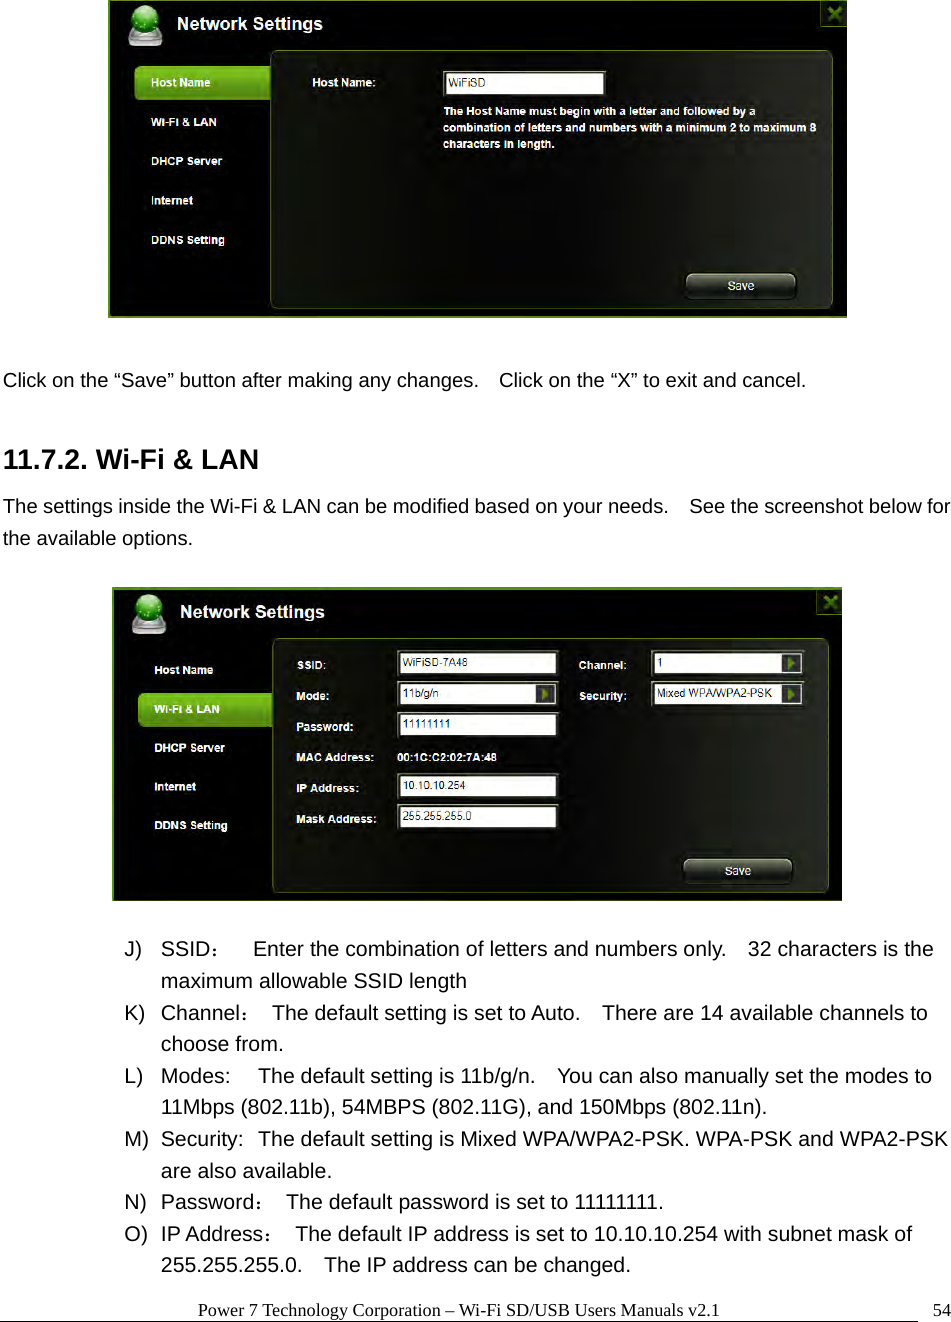 Power 7 Technology Corporation – Wi-Fi SD/USB Users Manuals v2.1  54  Click on the “Save” button after making any changes.    Click on the “X” to exit and cancel.  11.7.2. Wi-Fi &amp; LAN The settings inside the Wi-Fi &amp; LAN can be modified based on your needs.    See the screenshot below for the available options.    J) SSID：    Enter the combination of letters and numbers only.    32 characters is the maximum allowable SSID length   K) Channel：  The default setting is set to Auto.    There are 14 available channels to choose from. L)  Modes:  The default setting is 11b/g/n.    You can also manually set the modes to 11Mbps (802.11b), 54MBPS (802.11G), and 150Mbps (802.11n). M)  Security:  The default setting is Mixed WPA/WPA2-PSK. WPA-PSK and WPA2-PSK are also available. N) Password：  The default password is set to 11111111. O) IP Address：  The default IP address is set to 10.10.10.254 with subnet mask of 255.255.255.0.    The IP address can be changed. 